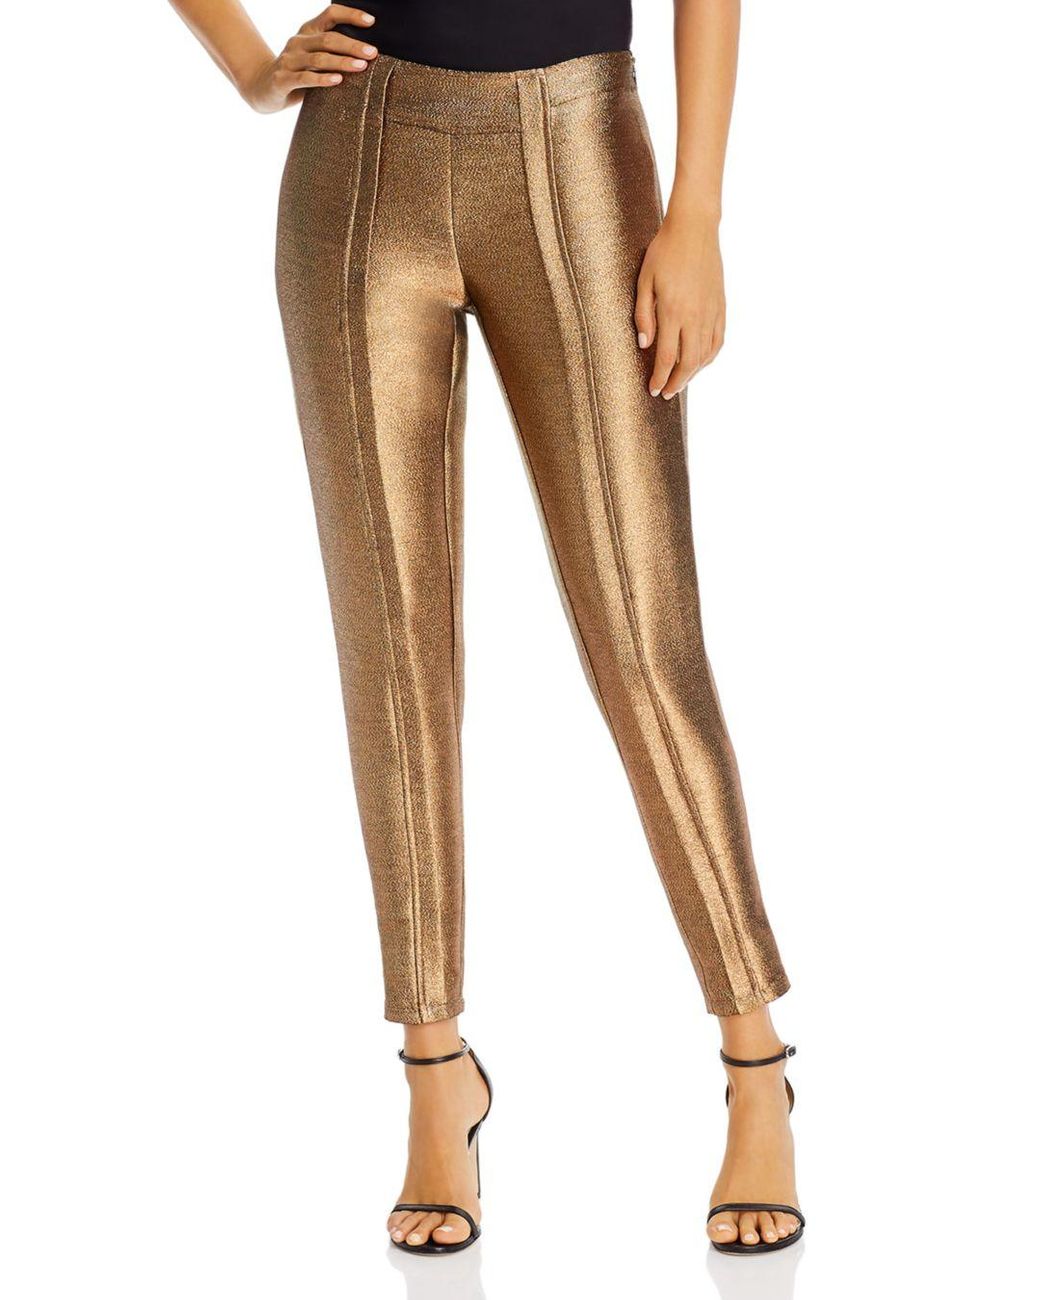 gold lame jeans